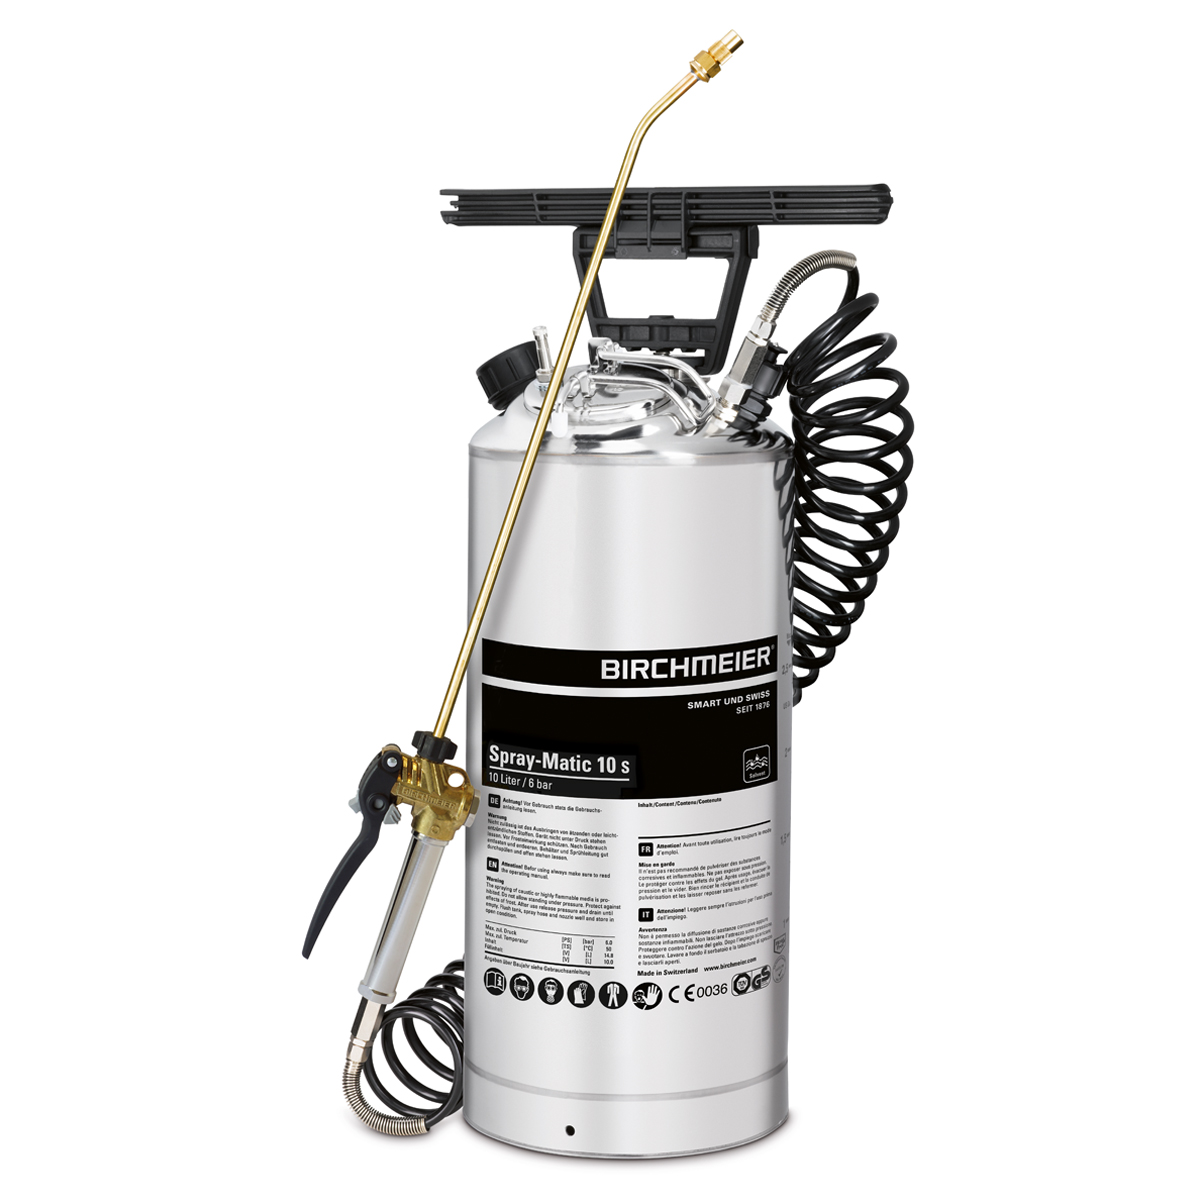 Spray-Matic 10 S with hand pump and compressed-air union